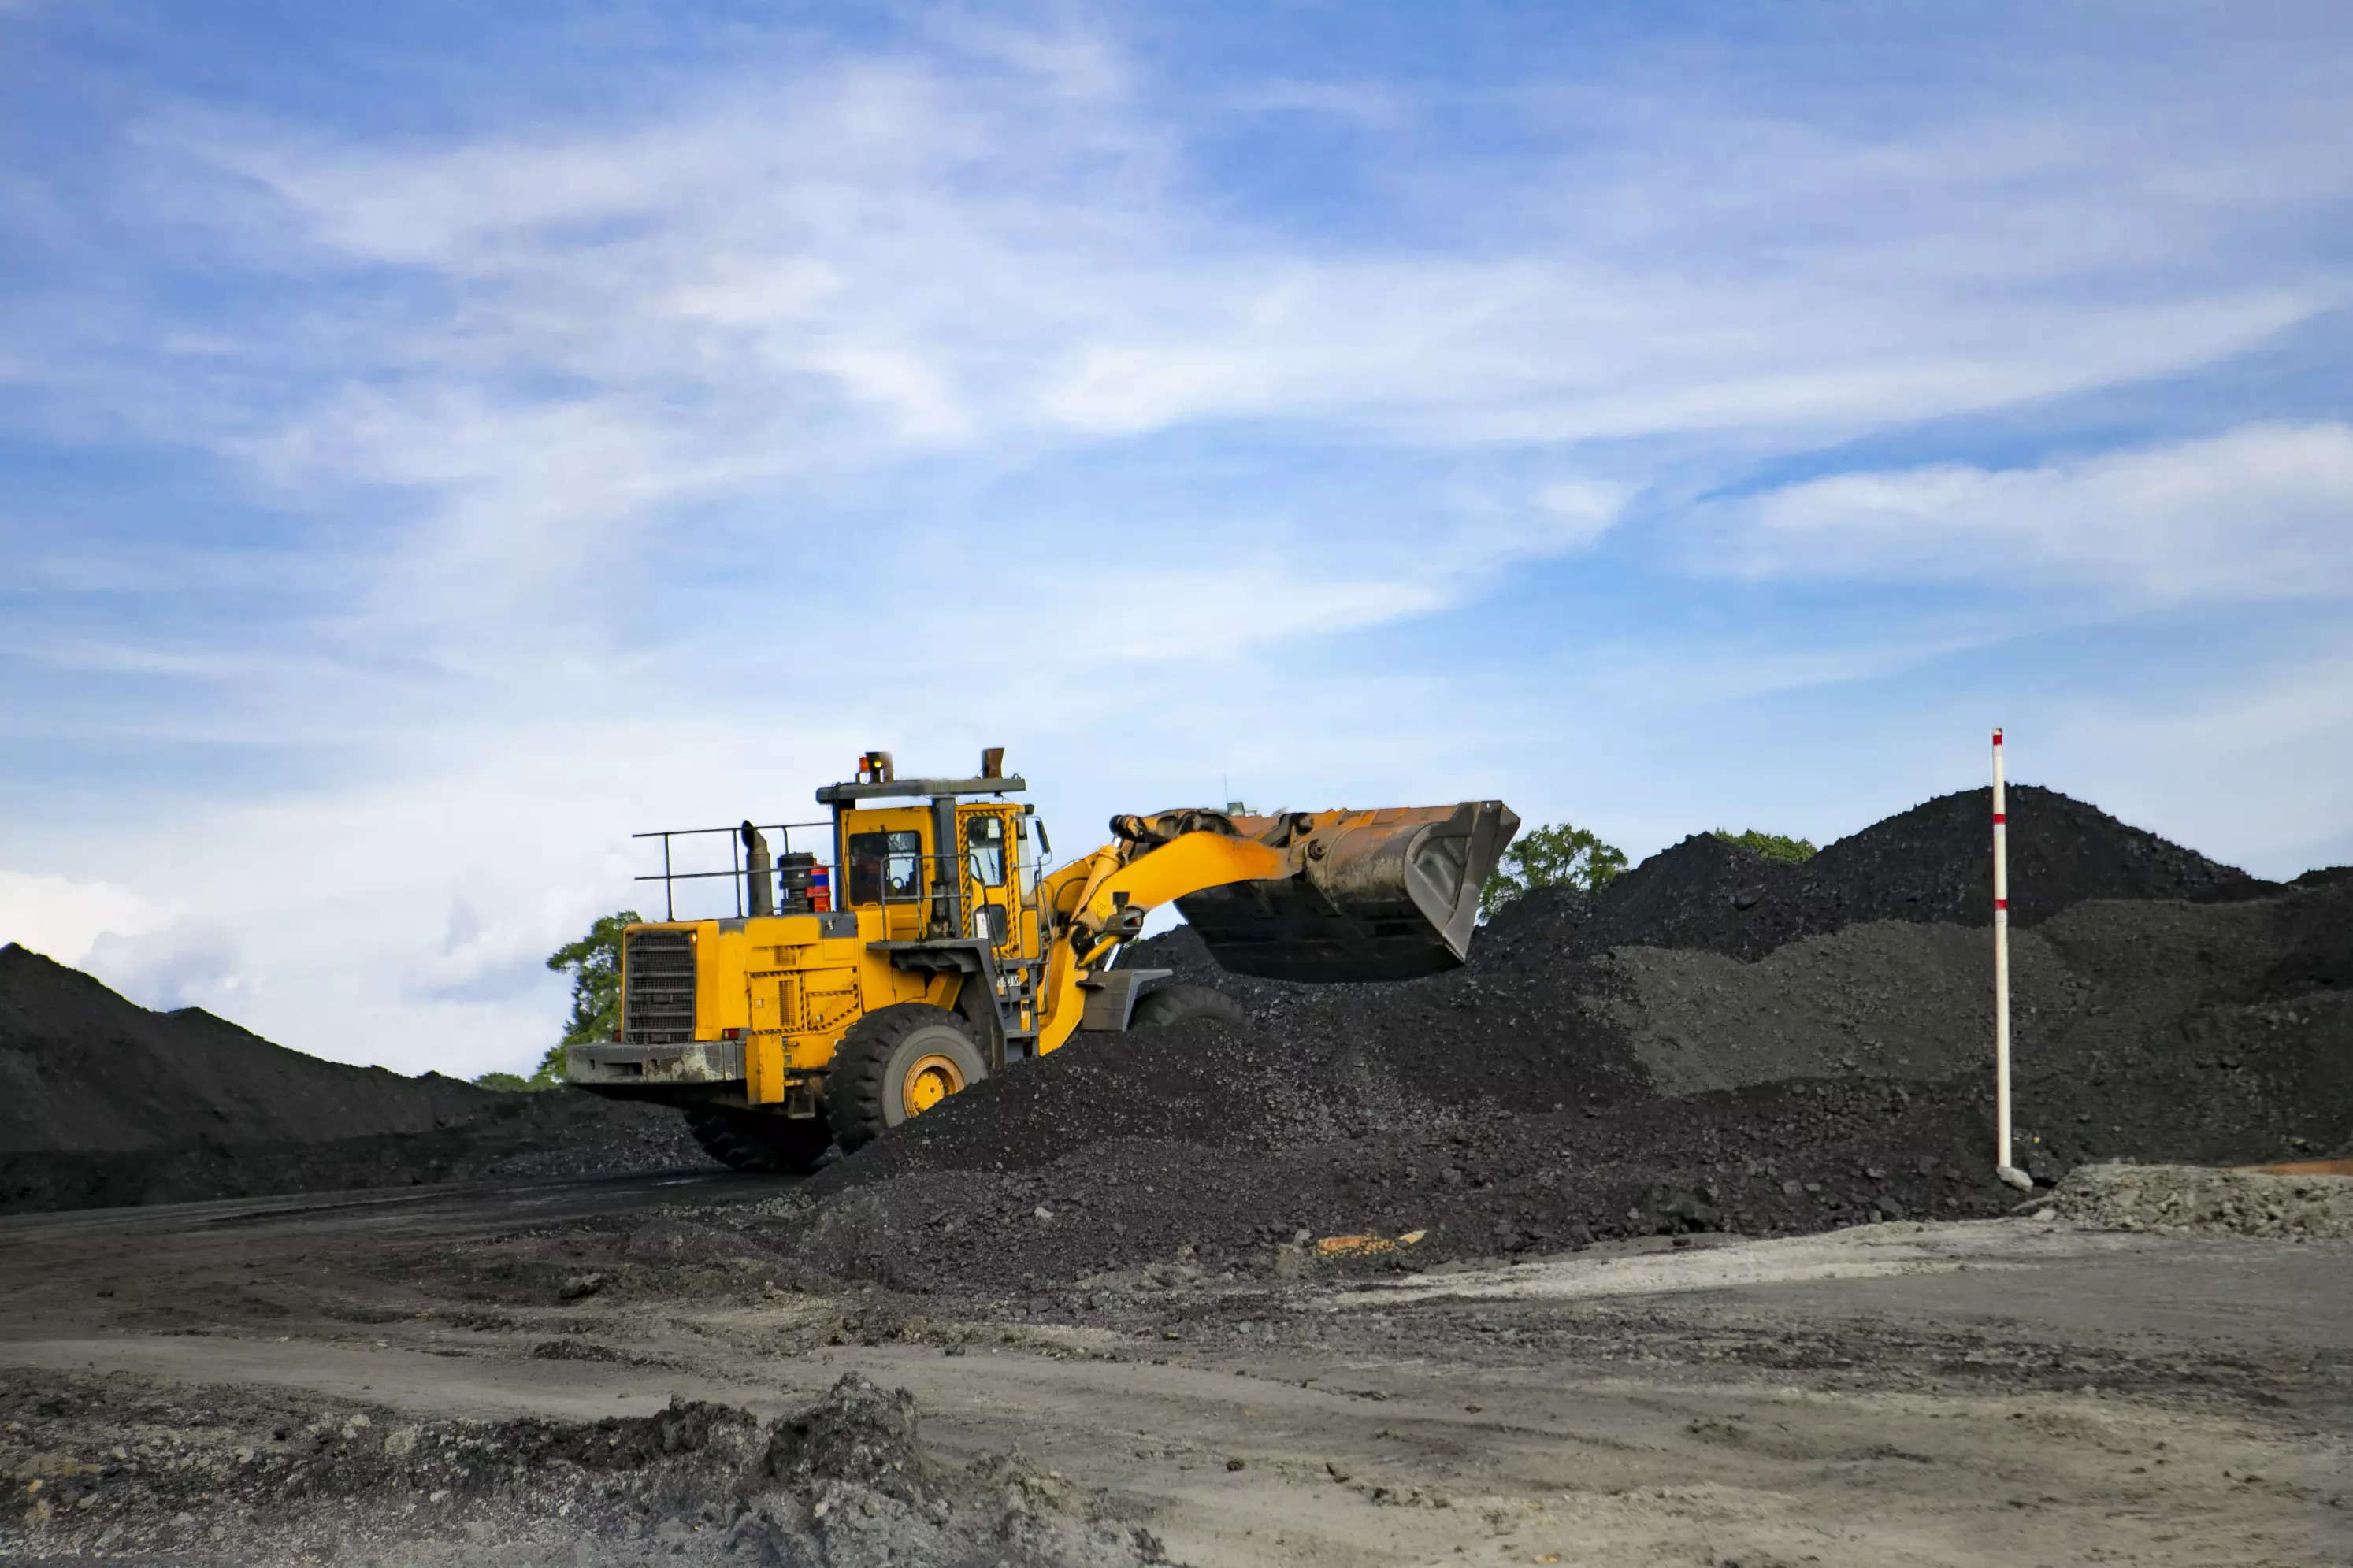  Ridwan said coal supplies to power plants each month were below the DMO, so by the end of the year &quot;there was a coal stockpile deficit,&quot; adding that the ban will be evaluated after Jan. 5.